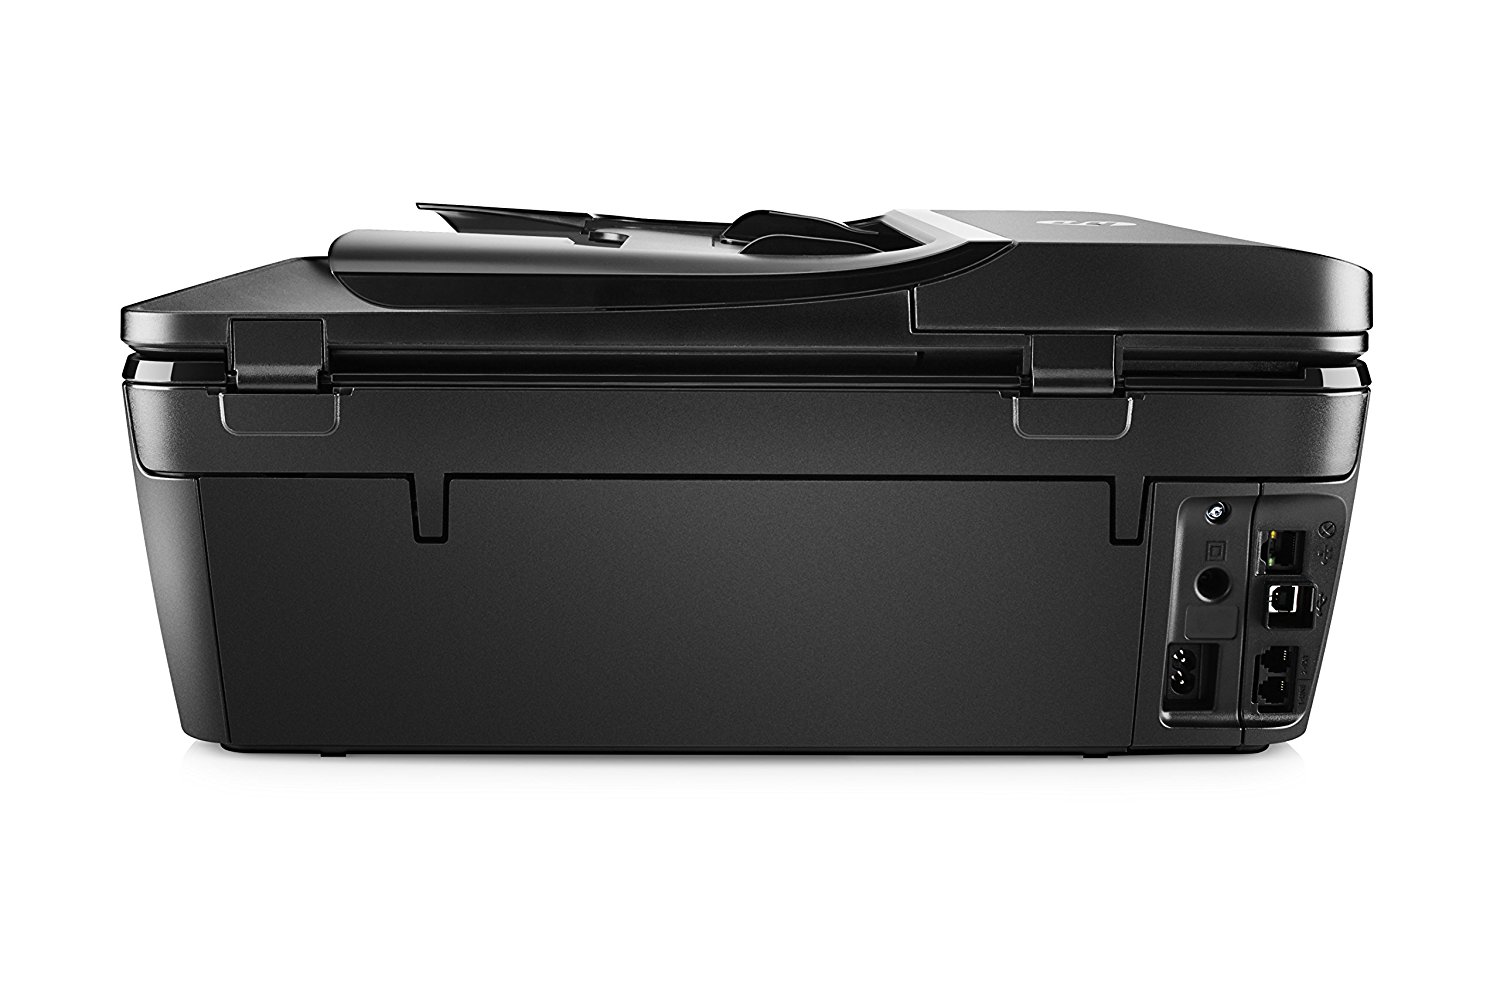 Hp Officejet 5744 All In One Printer With Wireless And Mobile Printing Includes 6 Months Of 5221